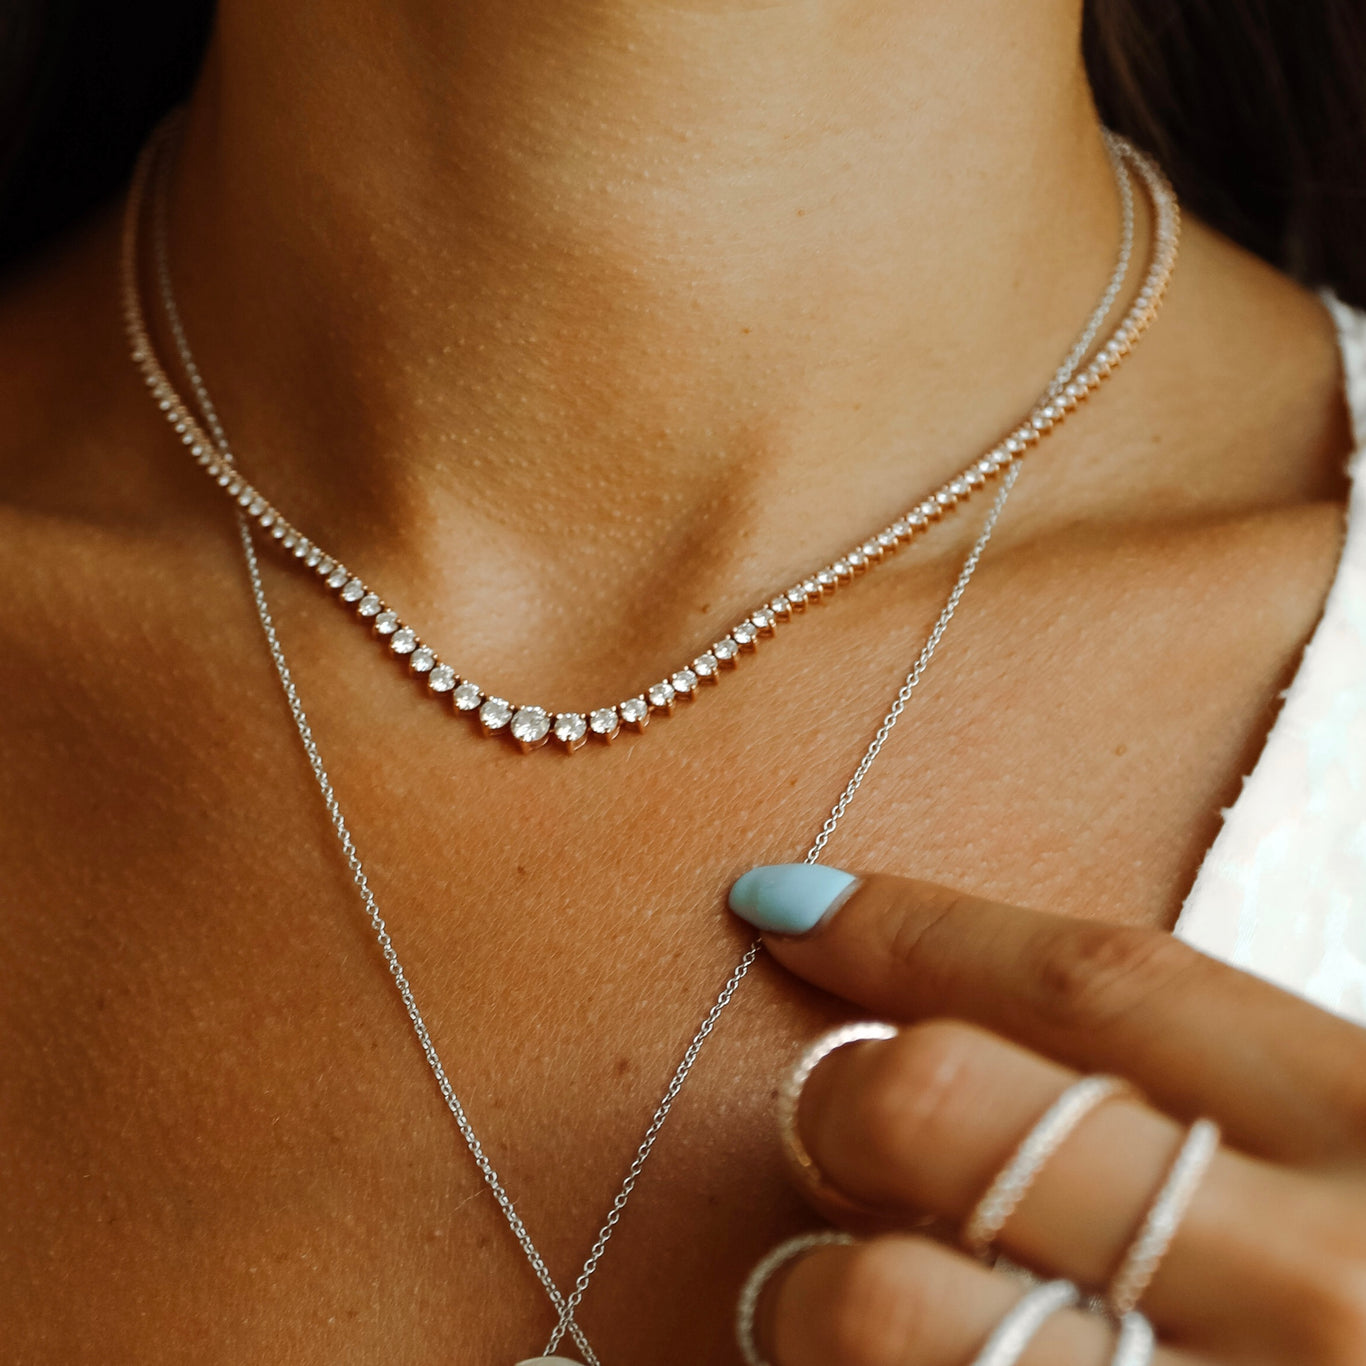 6.50 Carat Graduating Tennis Necklace shown worn with the Arabesque Ring.